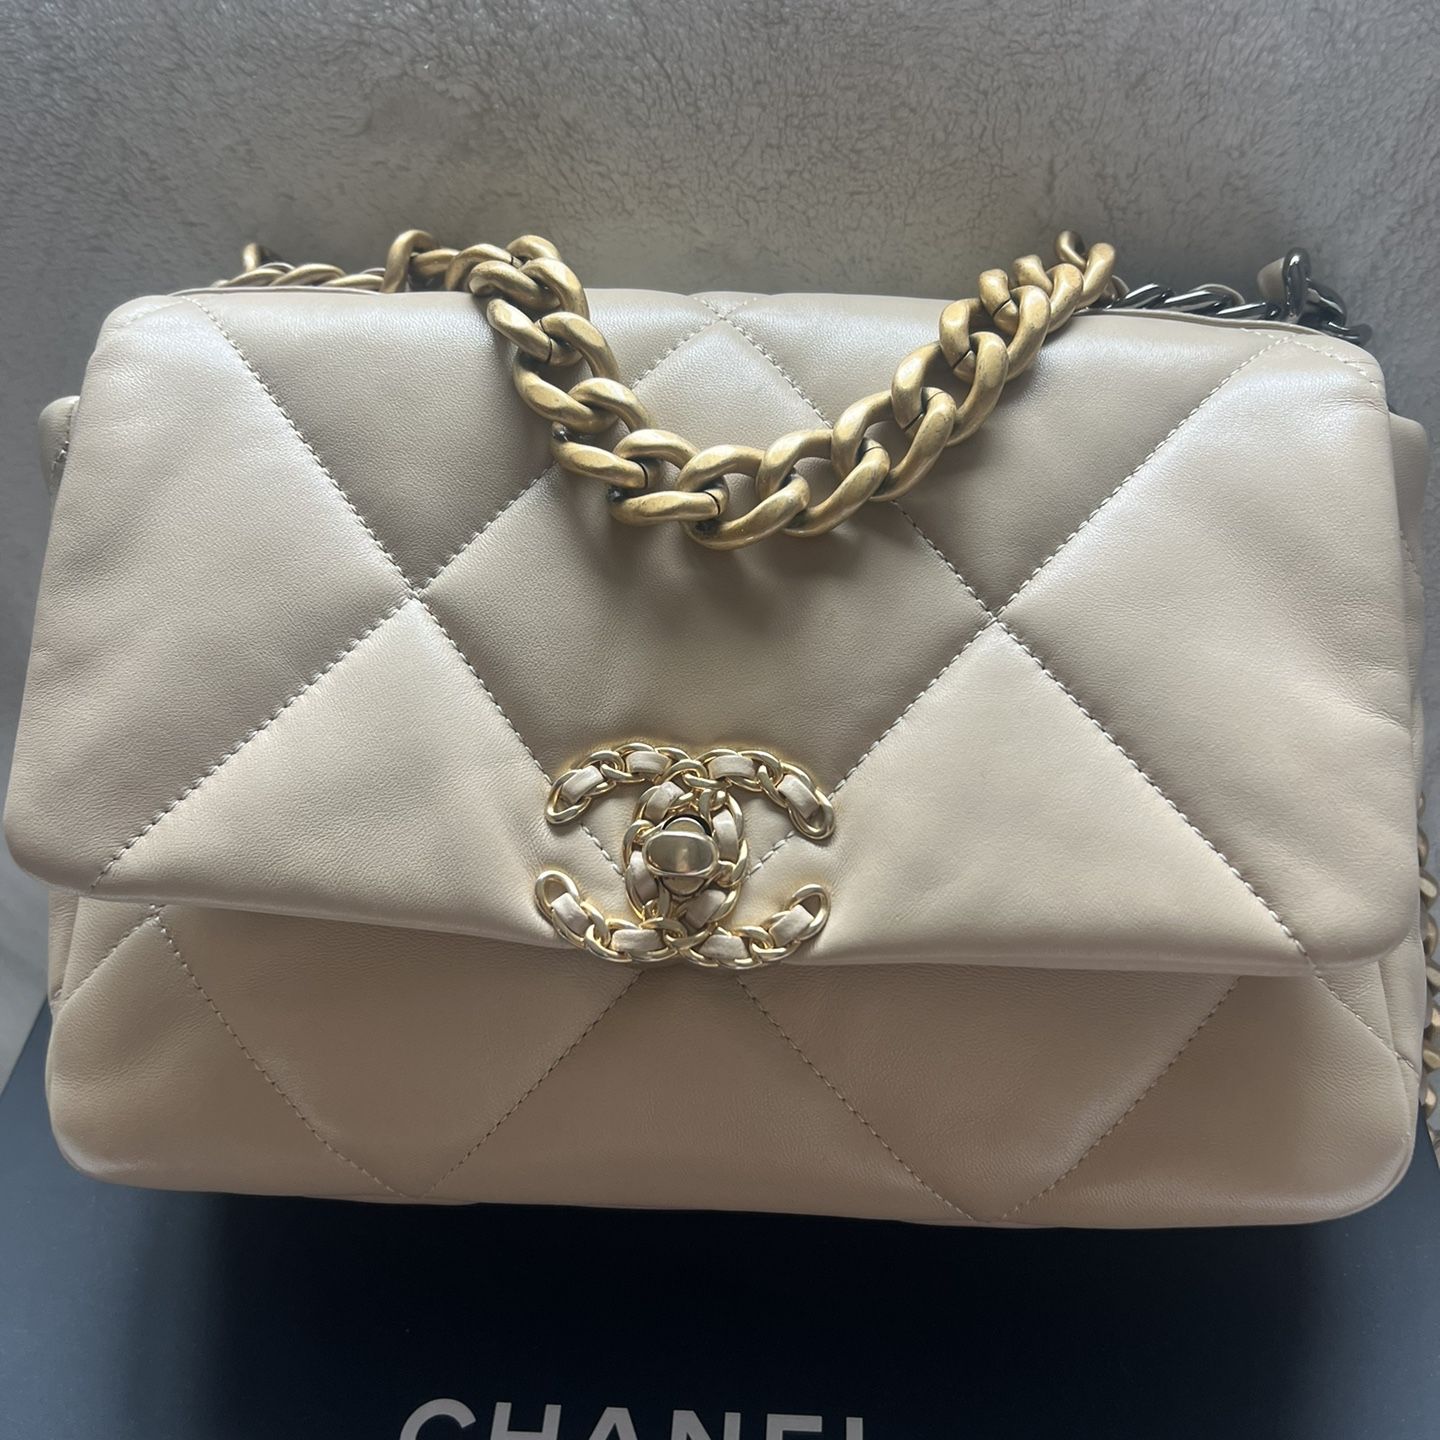 Chanel 19 Black Lambskin Large Crossbody Bag for Sale in Florence, KY -  OfferUp